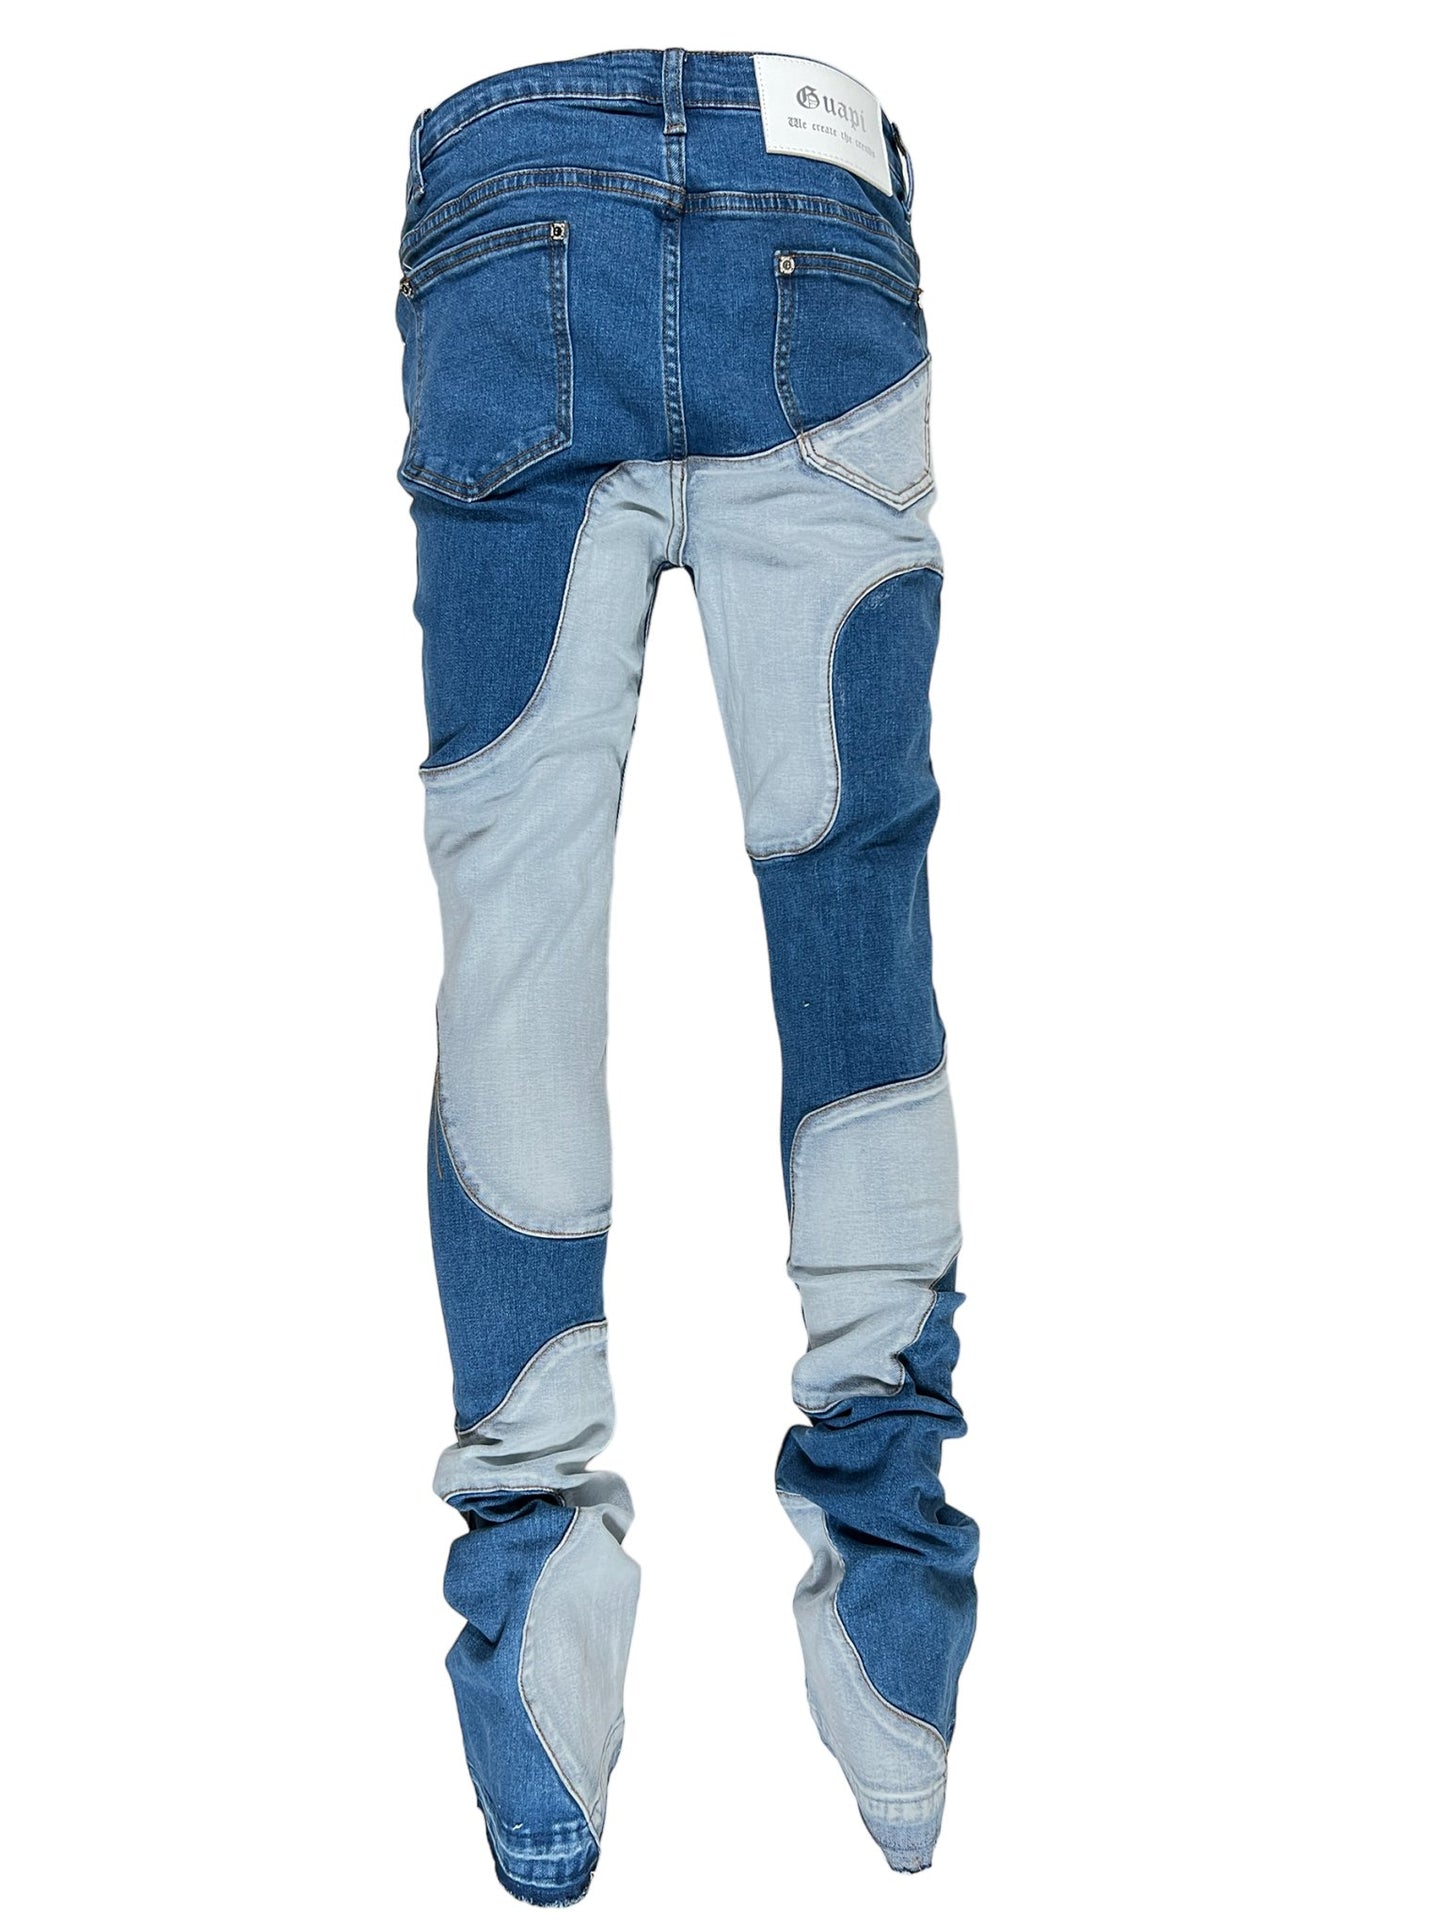 GUAPI VINTAGE BLUE WAVY DENIM jeans with white stitching, patches, and a perfect fit displayed against a white background.